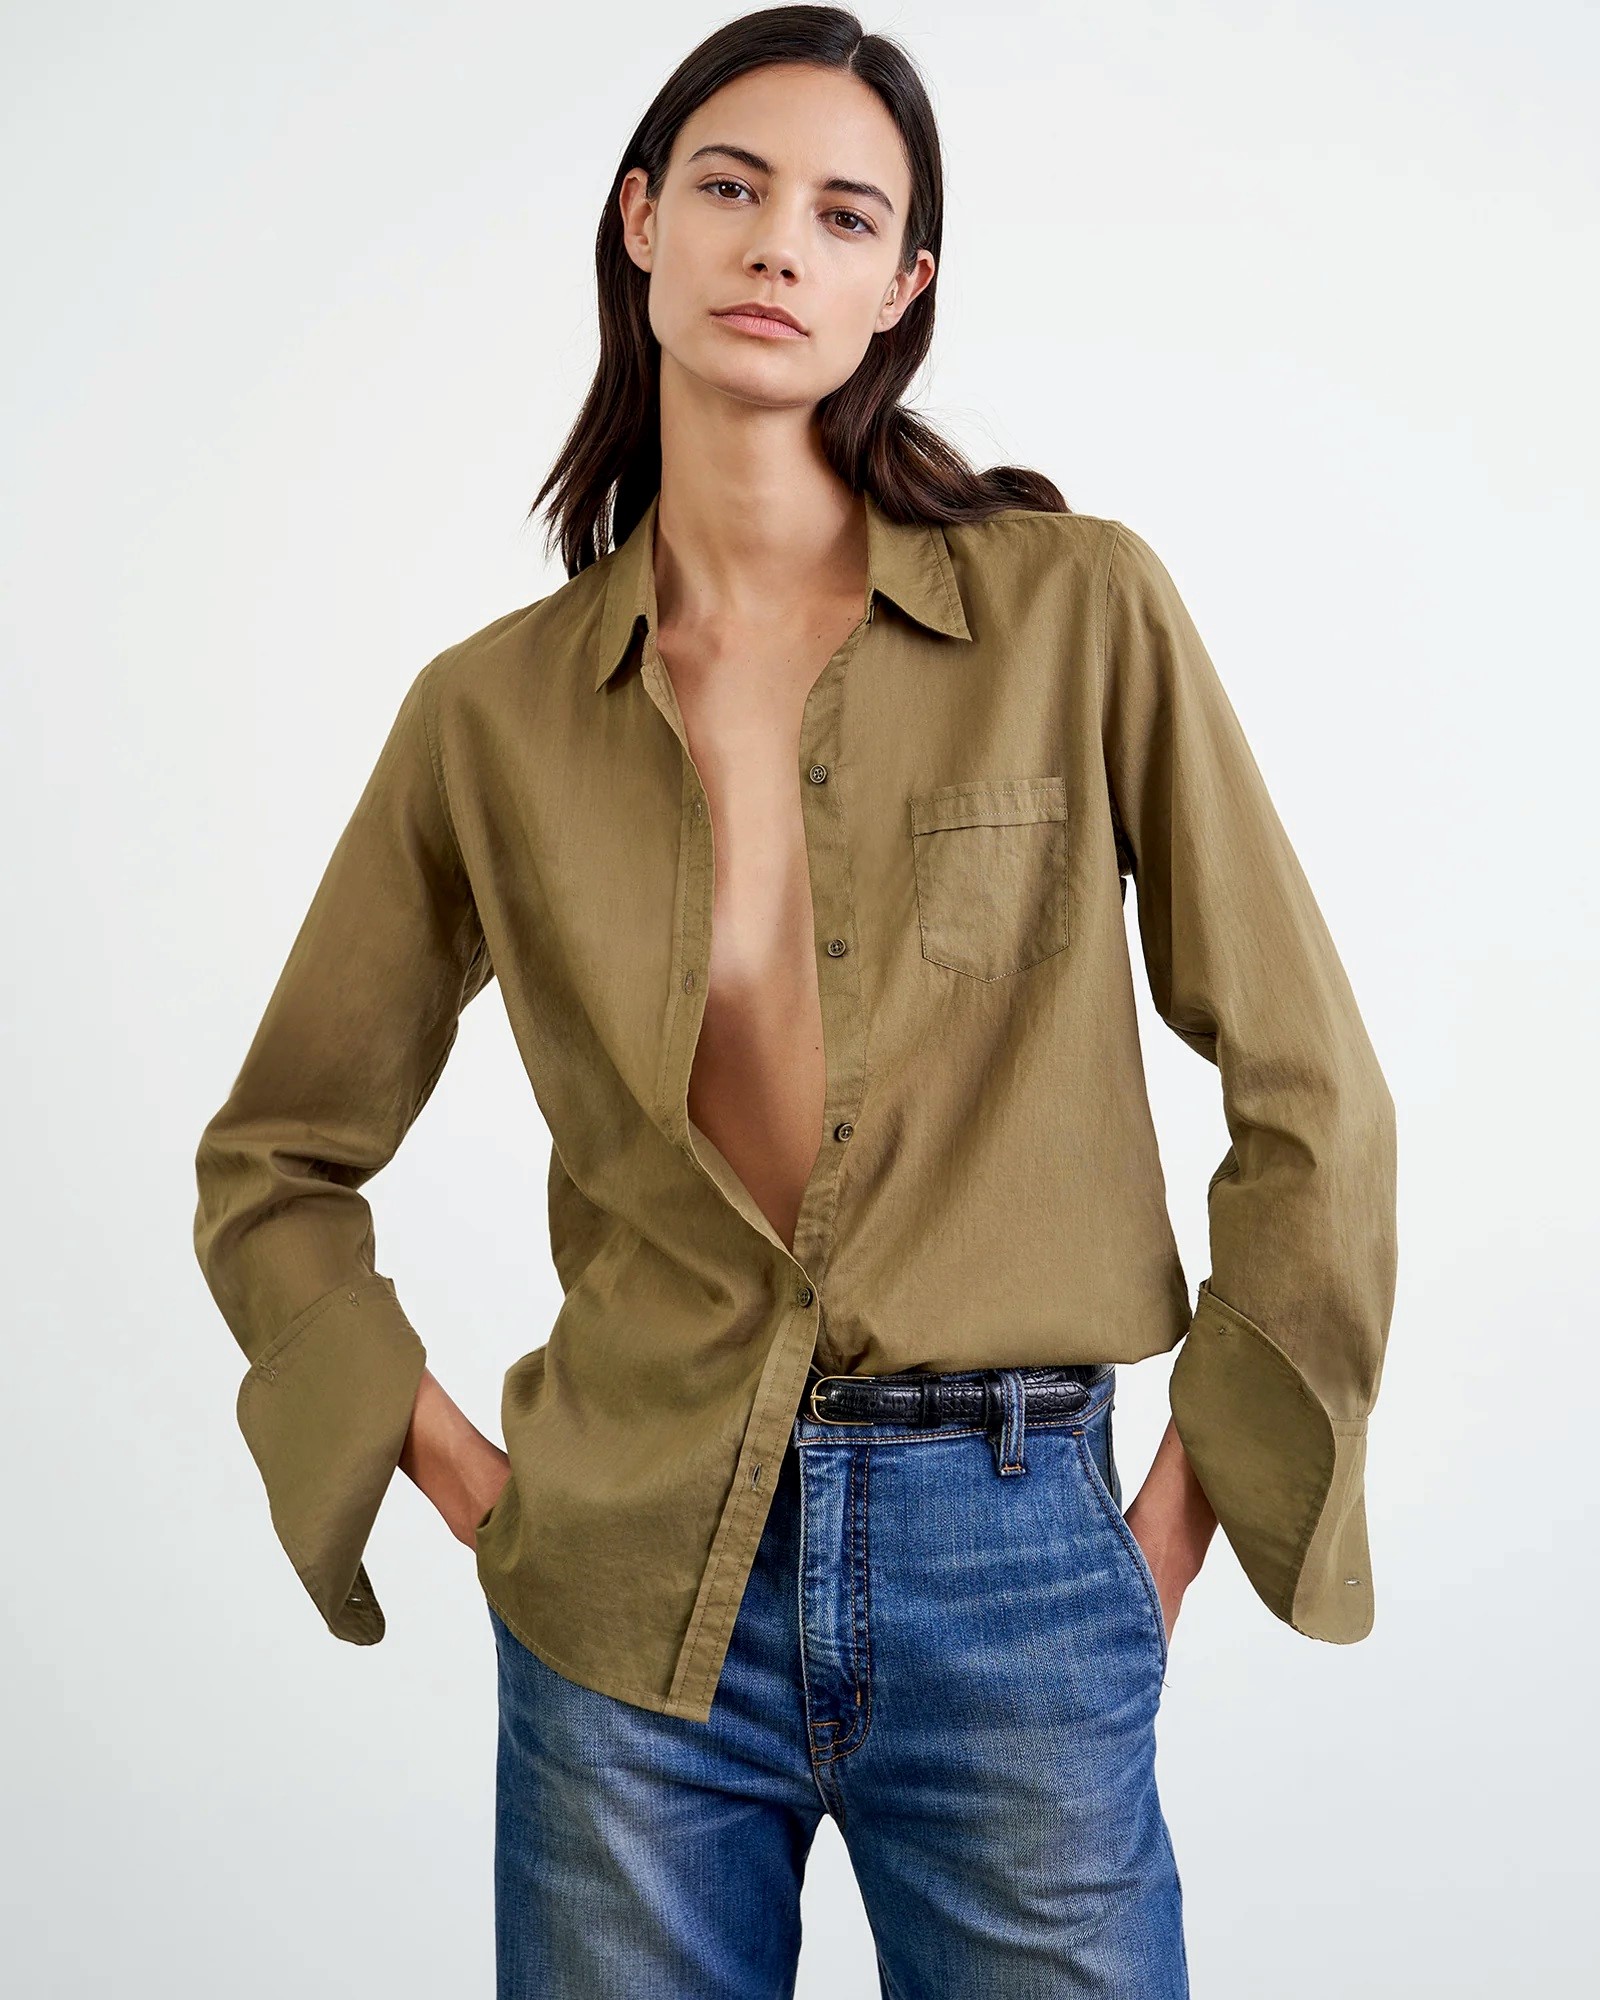 NILI LOTAN Cotton Voile NL Shirt in Olive Green XS